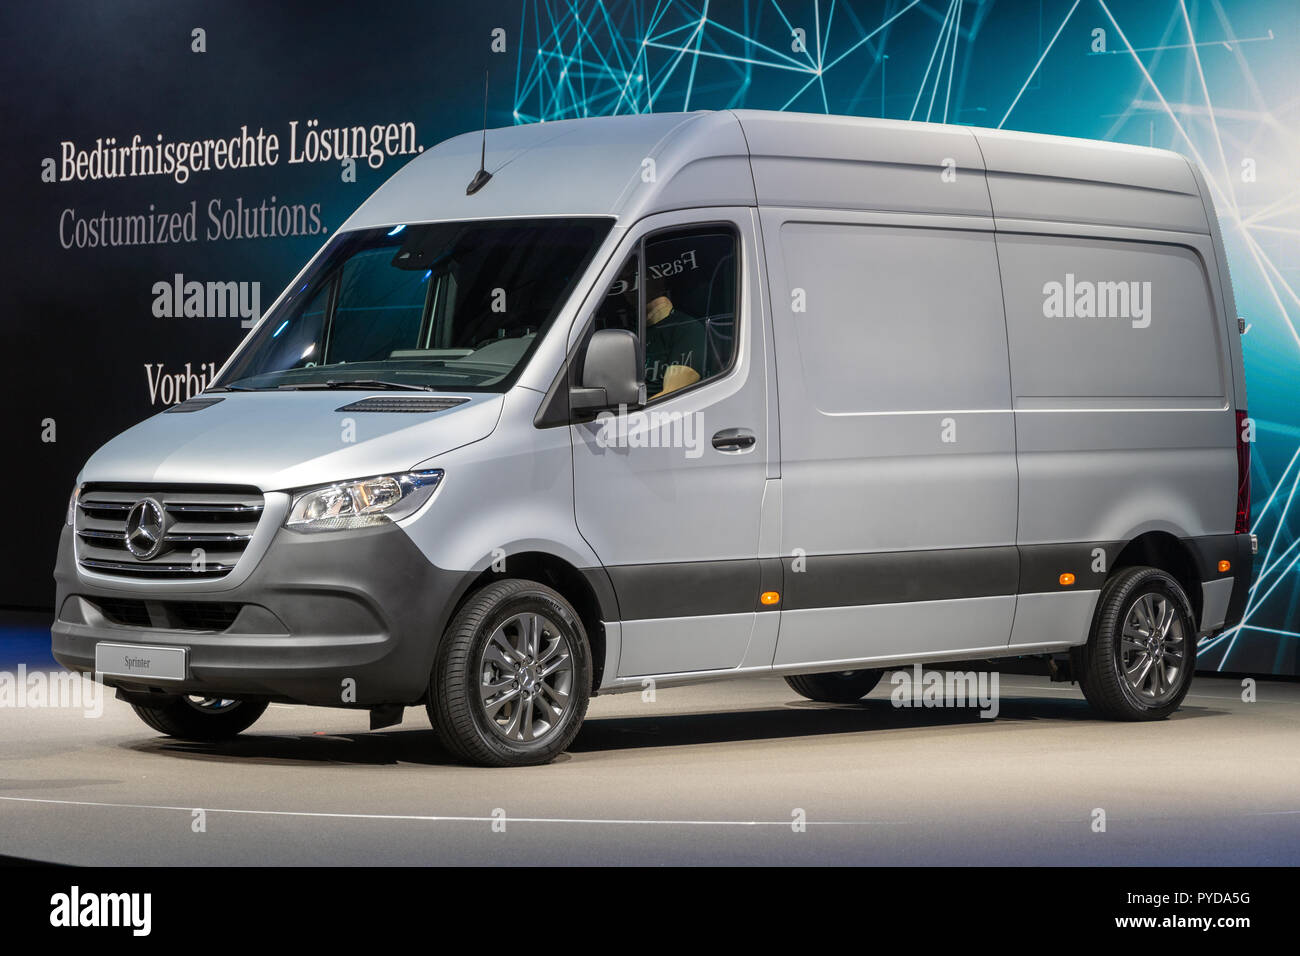 HANNOVER, GERMANY - SEP 27, 2018: New 2019 Mercedes-Benz Sprinter van  showcased at the Hannover IAA Commercial Vehicles Motor Show Stock Photo -  Alamy